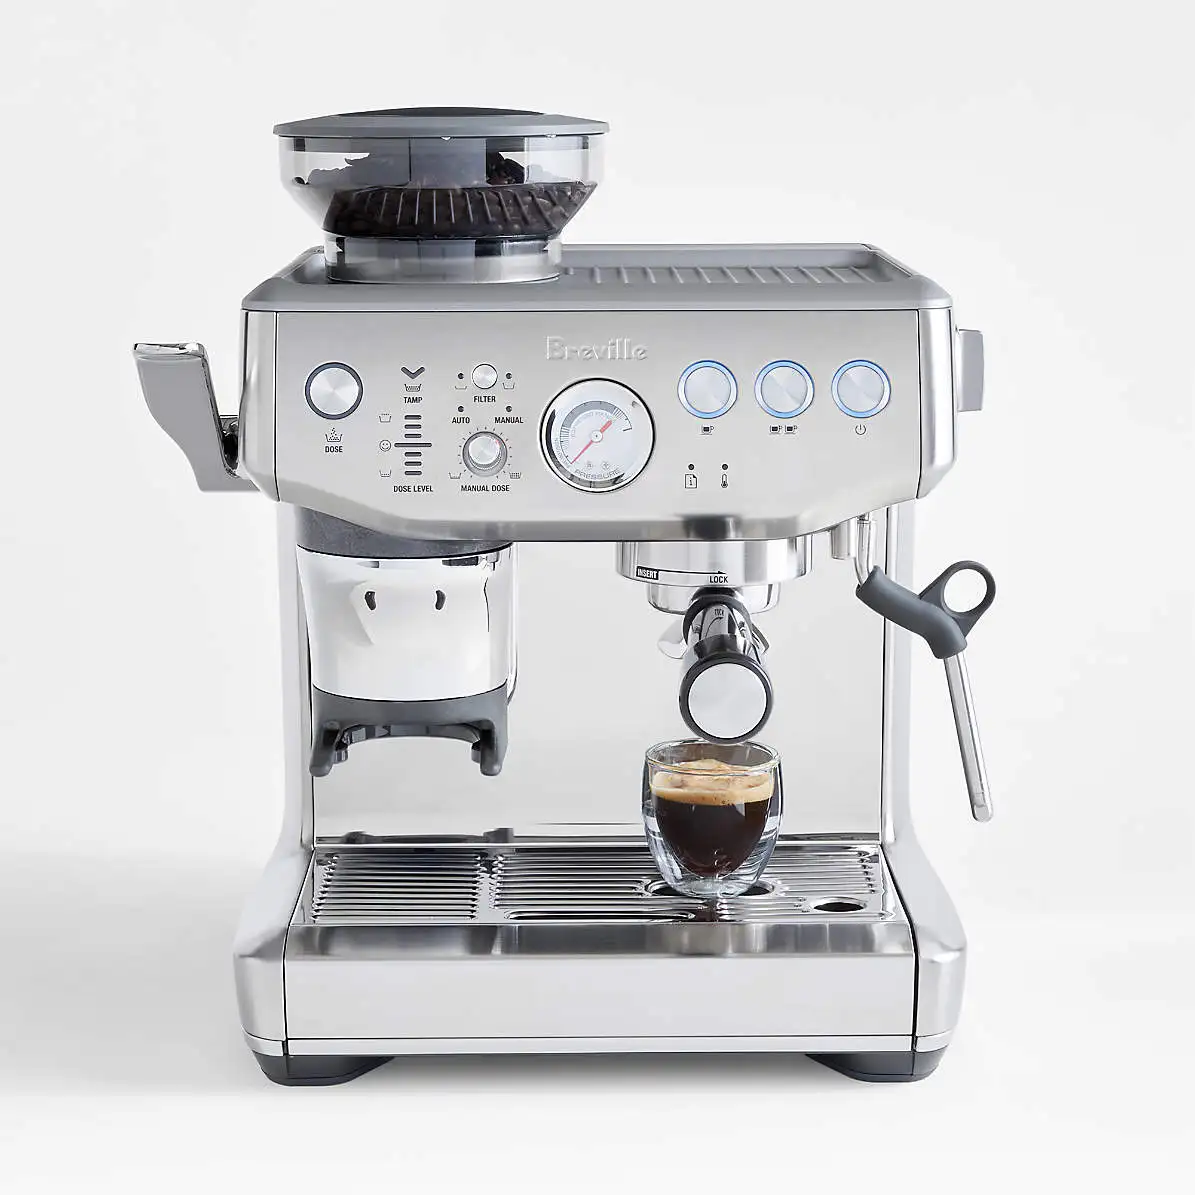 

High Quality New Brevilles Barista Express Espresso Machine, Brushed Stainless Steel, BES870XL